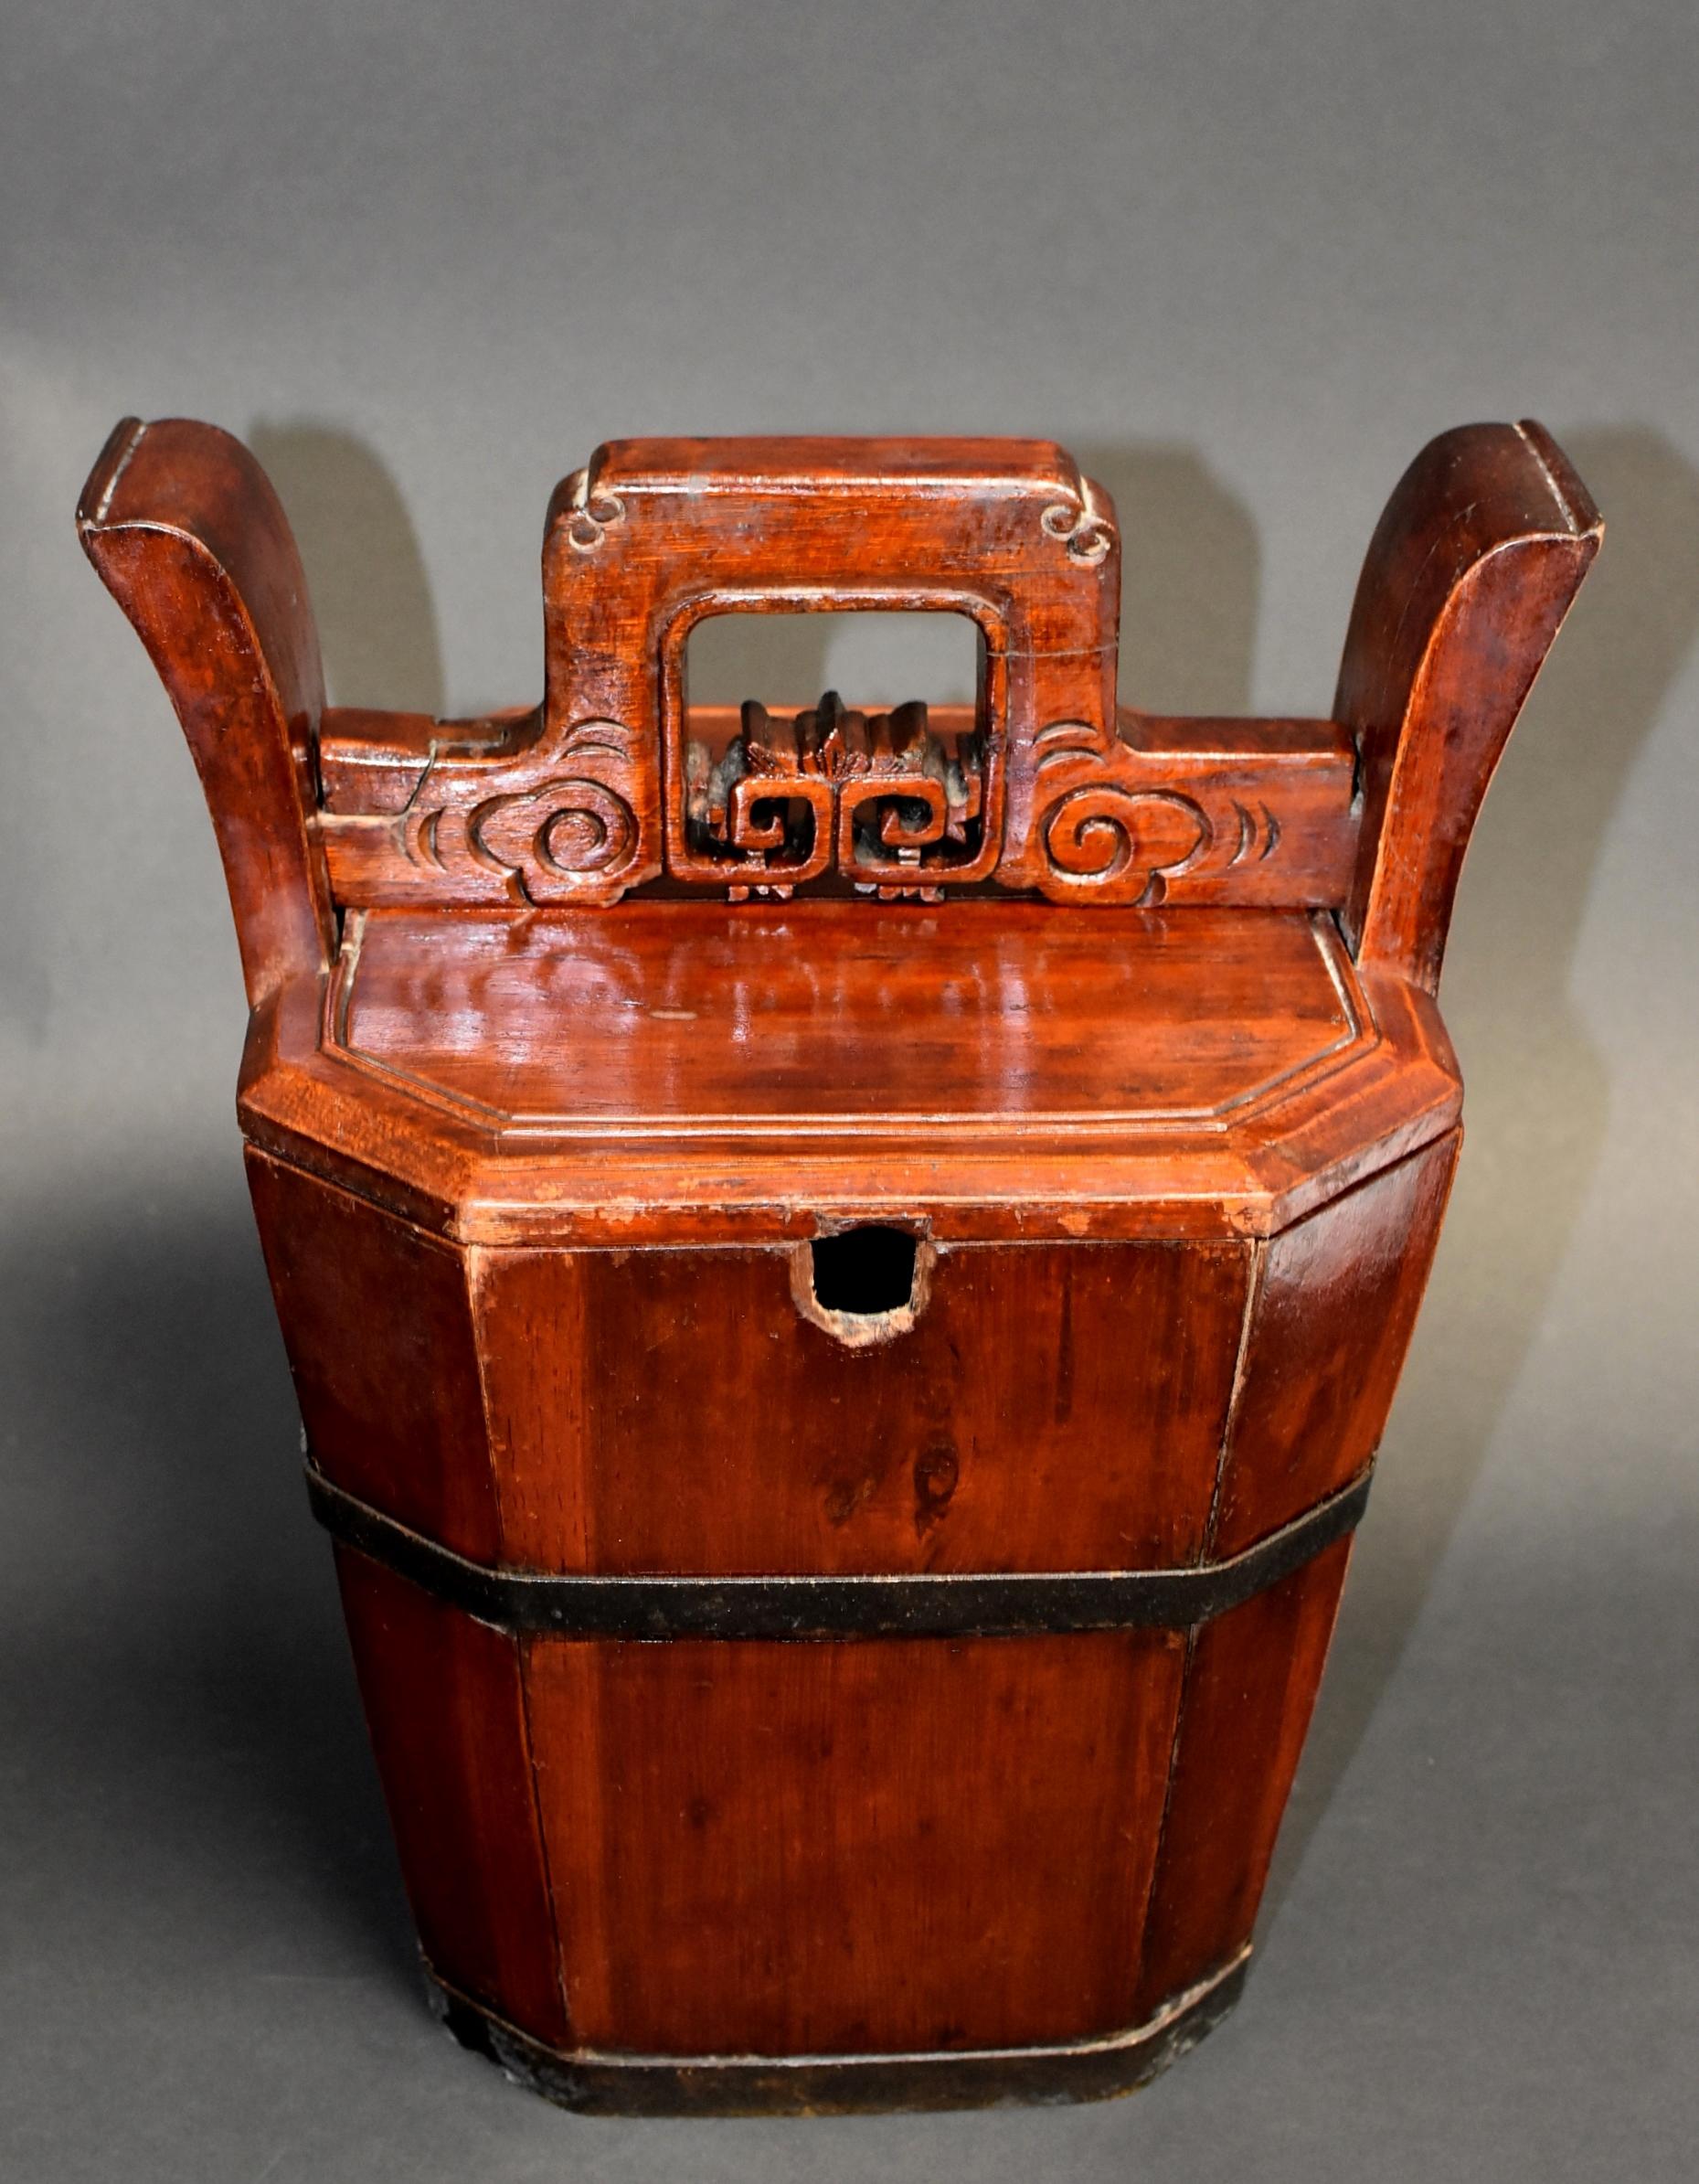 A beautiful 19th century wooden basket designed for holding and carrying a teapot. The handmade hexagonal basket's 6 sides are held together by 2 solid bronze bands. Above the lid lies a carved horizontal bar which acts as the lock to the basket.